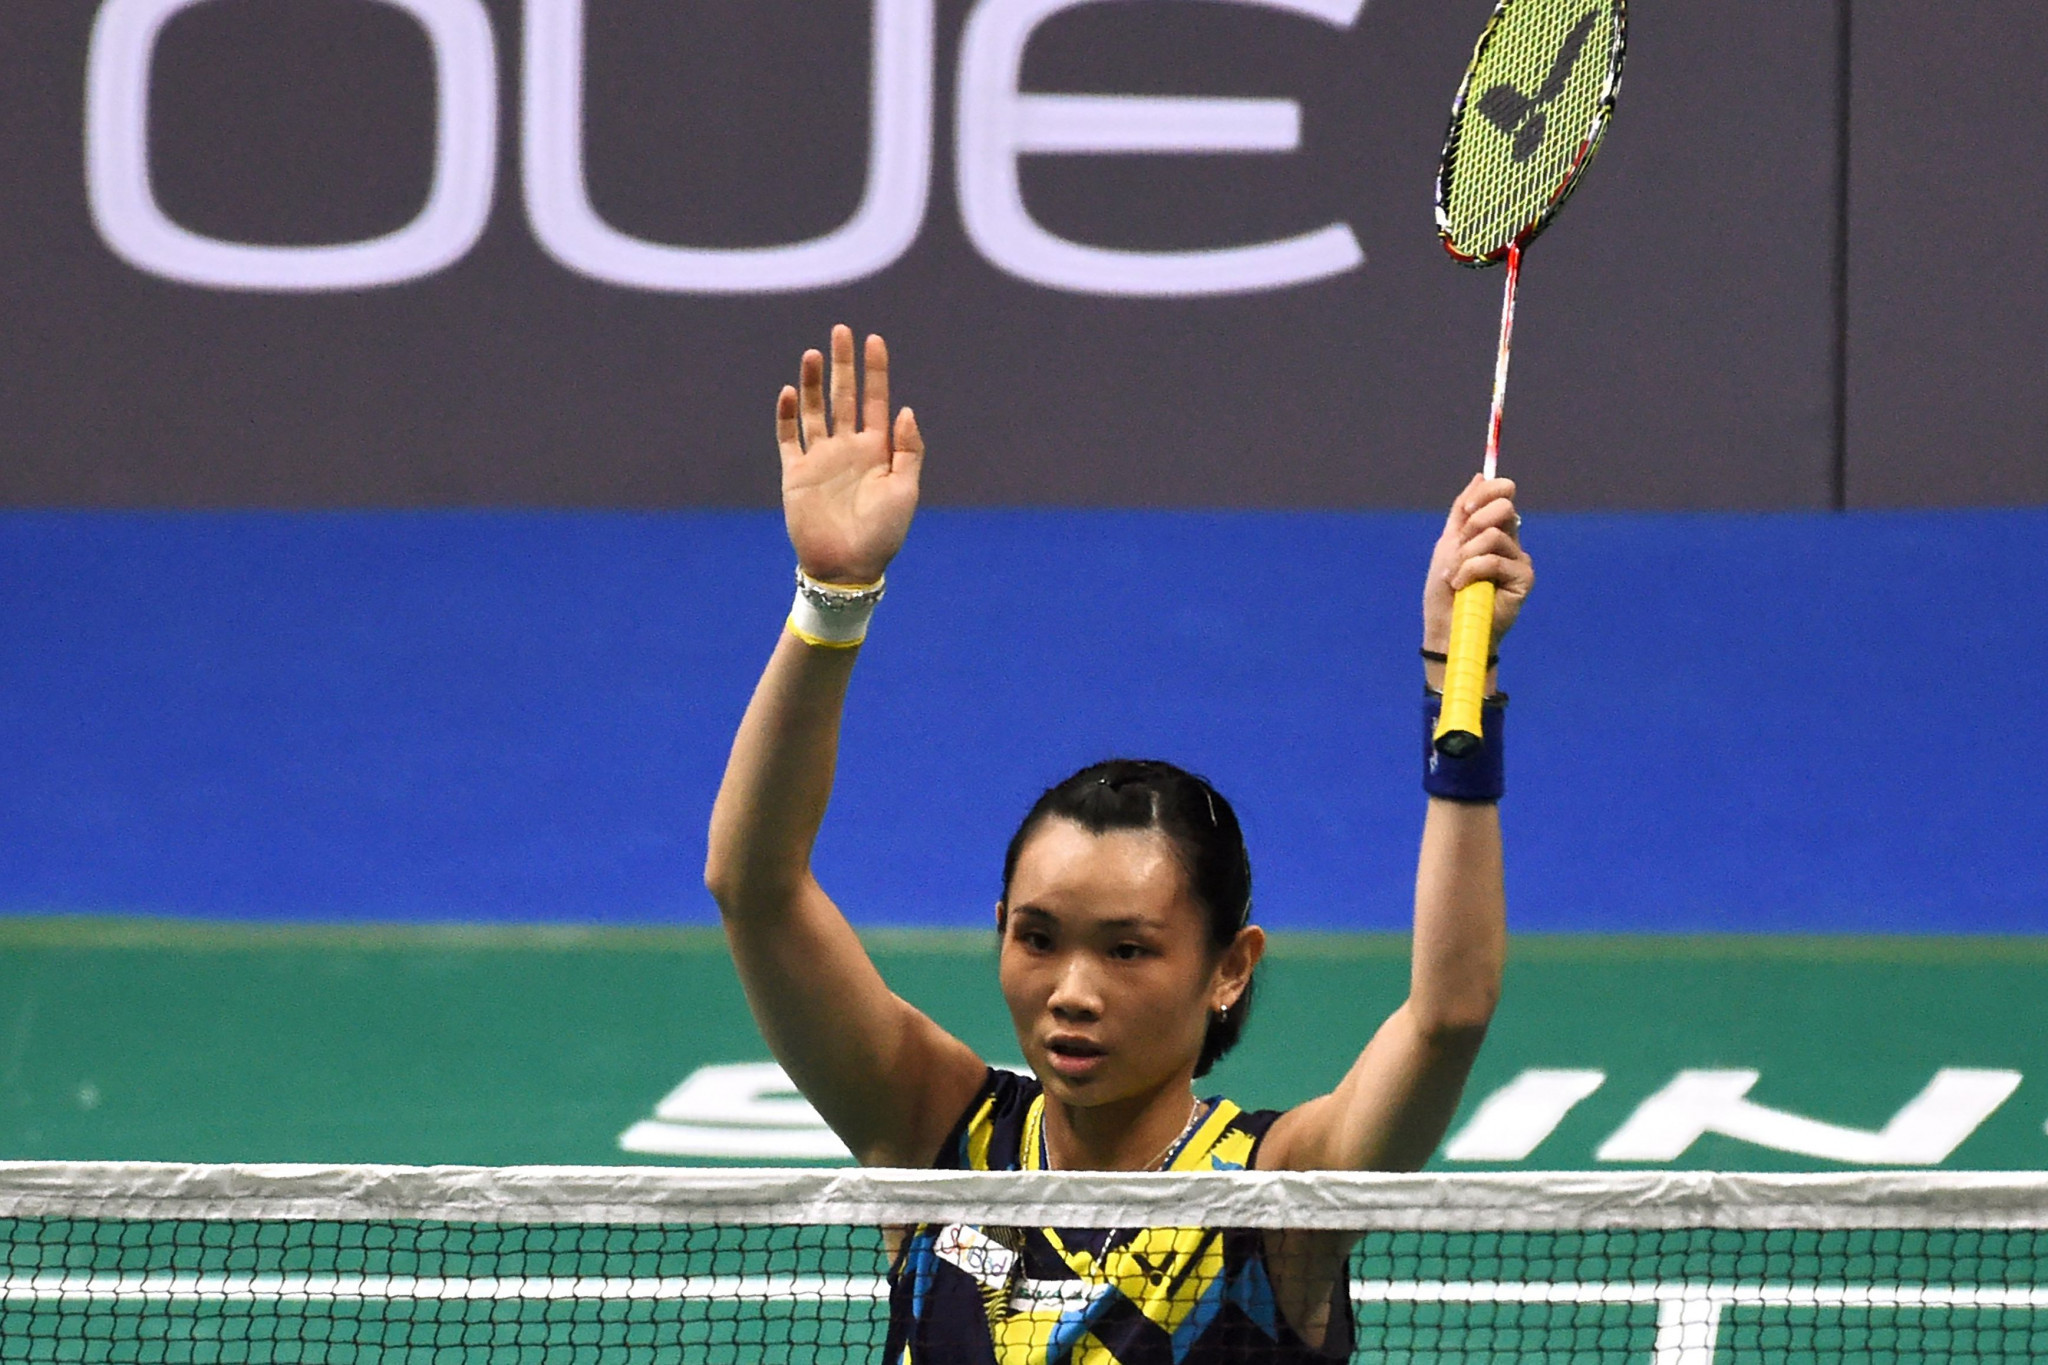 Taiwan's Tai Tzu-ying progressed on the opening day in Birmingham ©Getty Images